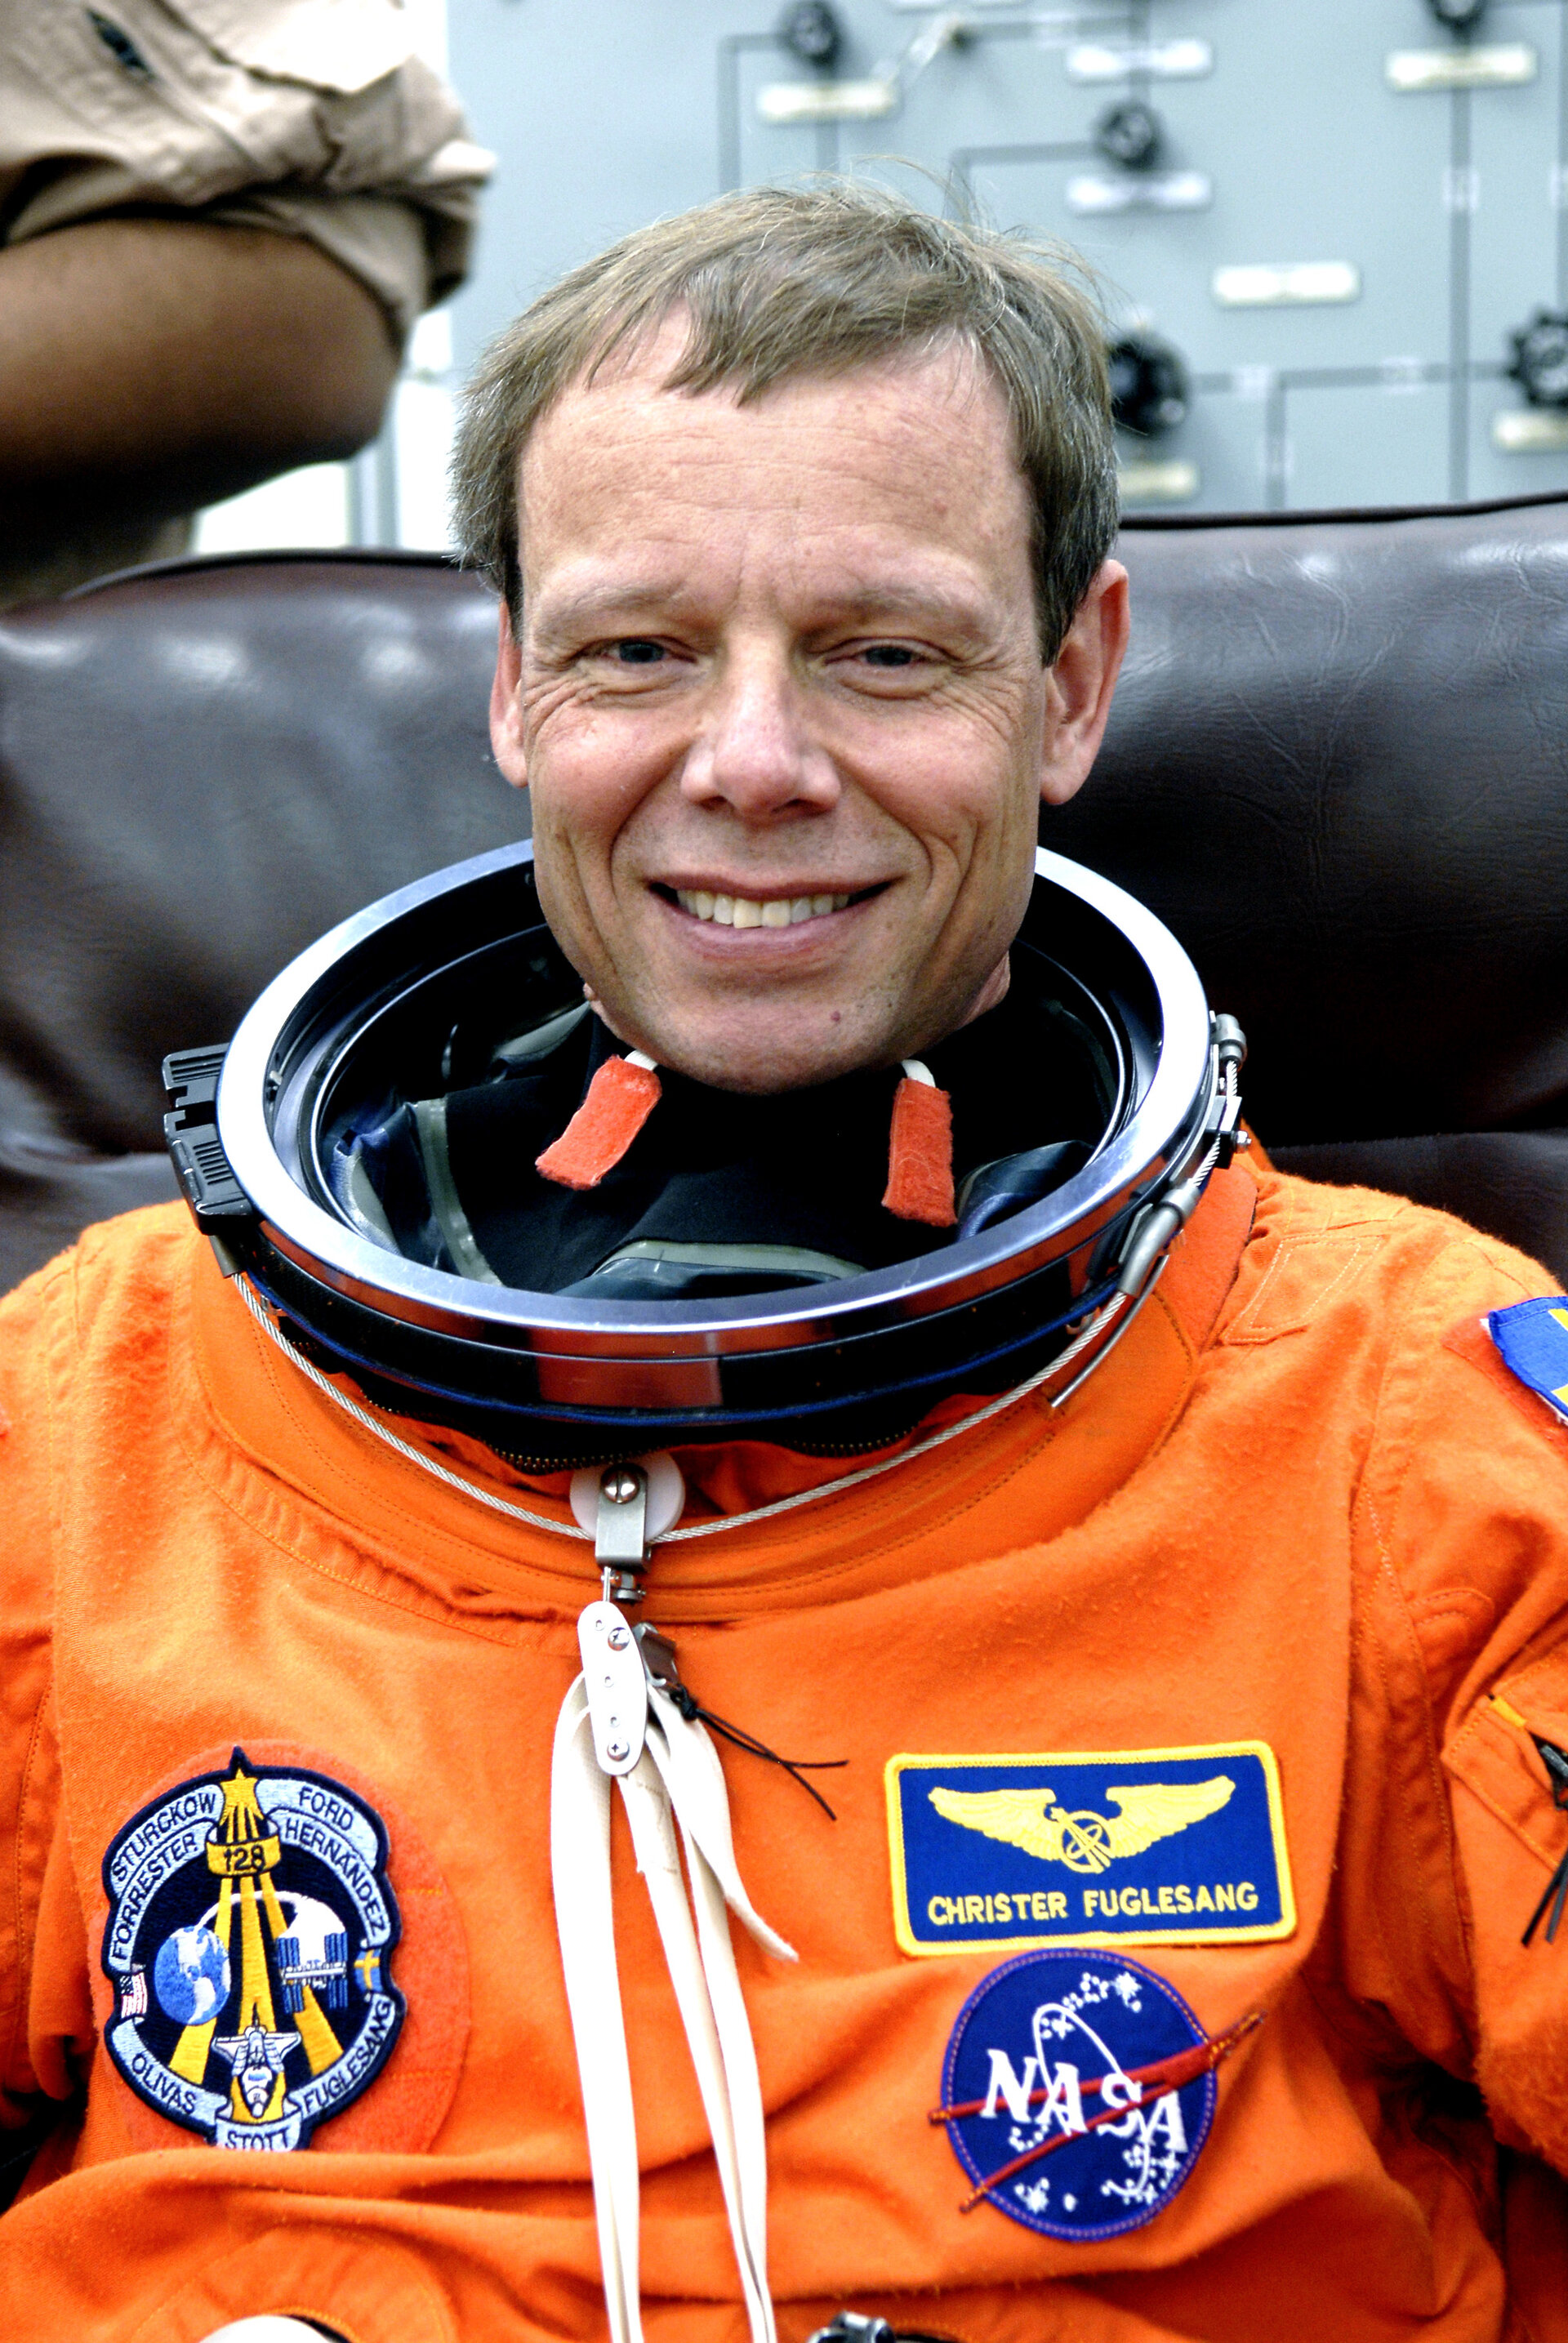 STS-128 will be Christer Fuglesang's second spaceflight